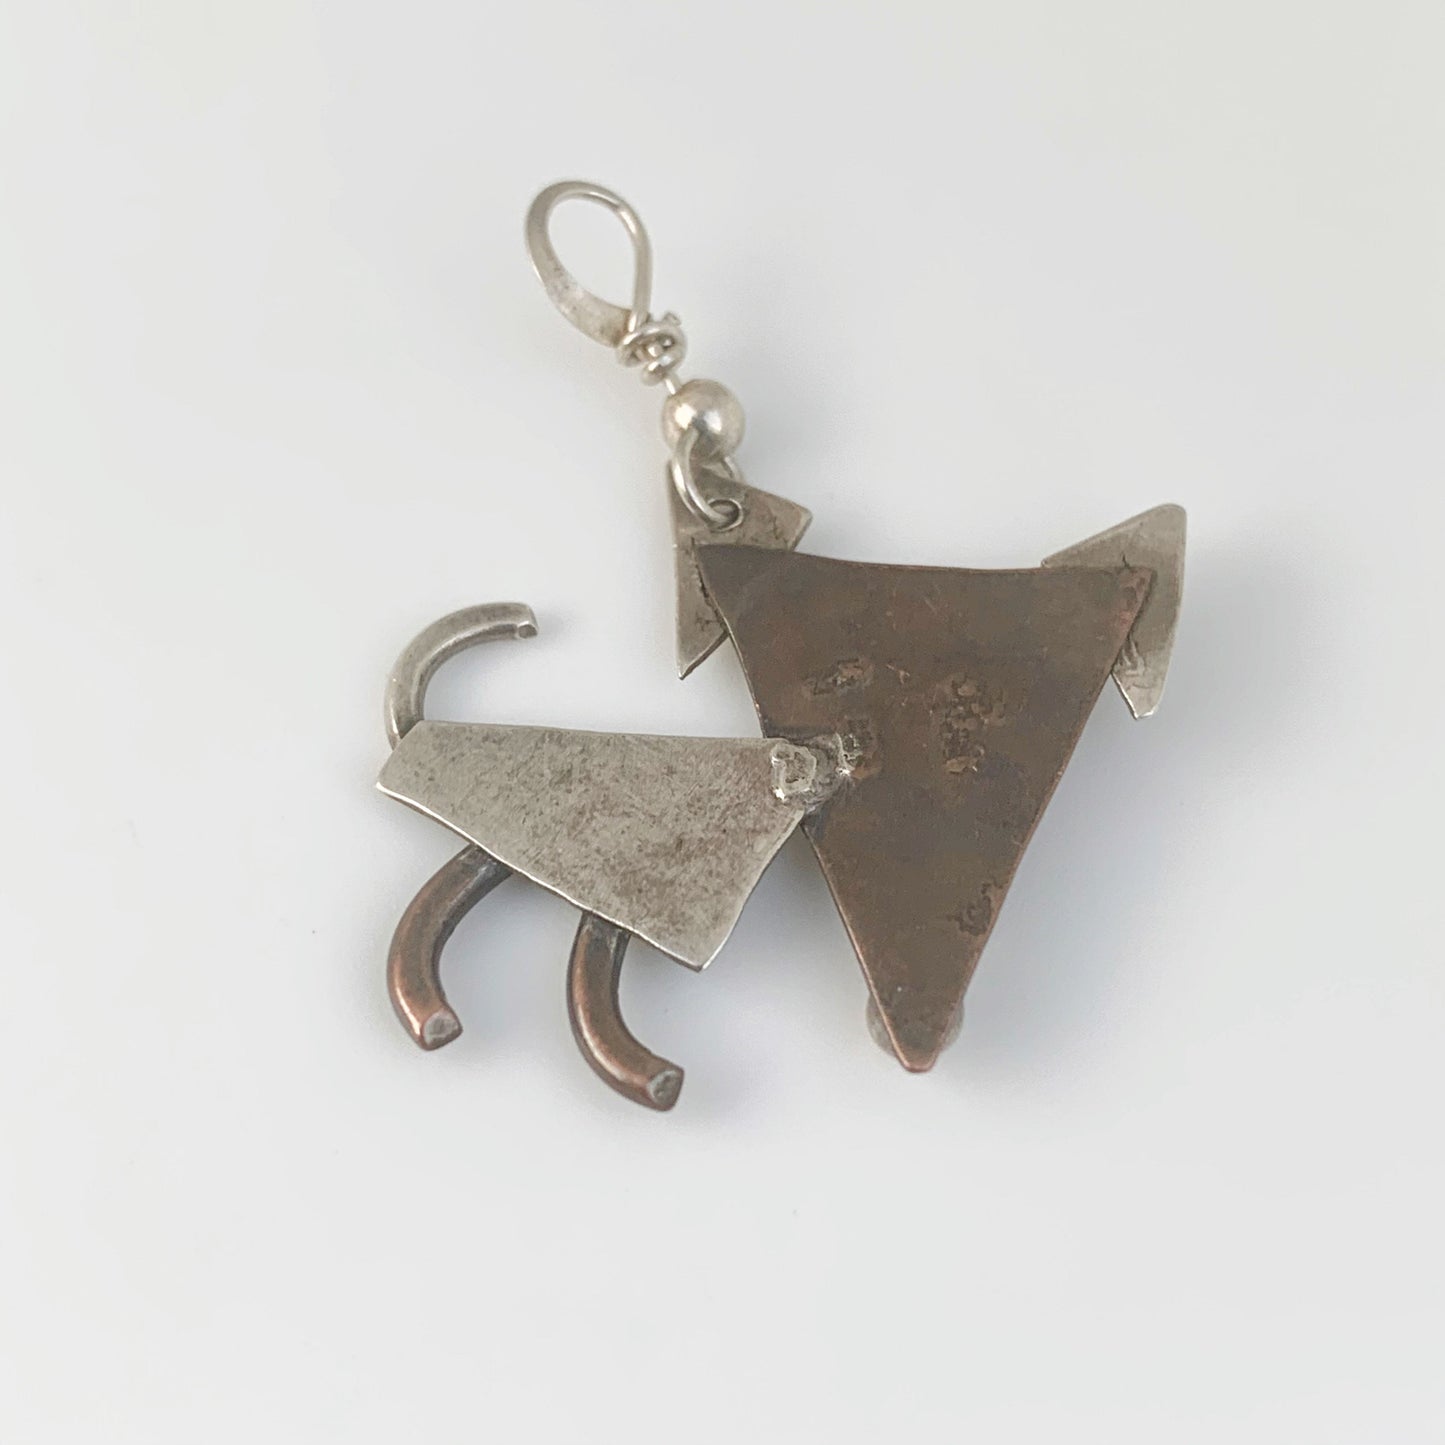 Handmade Silver and Copper Dog Charm | Whimsical Dog Charm Pendant | Mixed Metal Charm